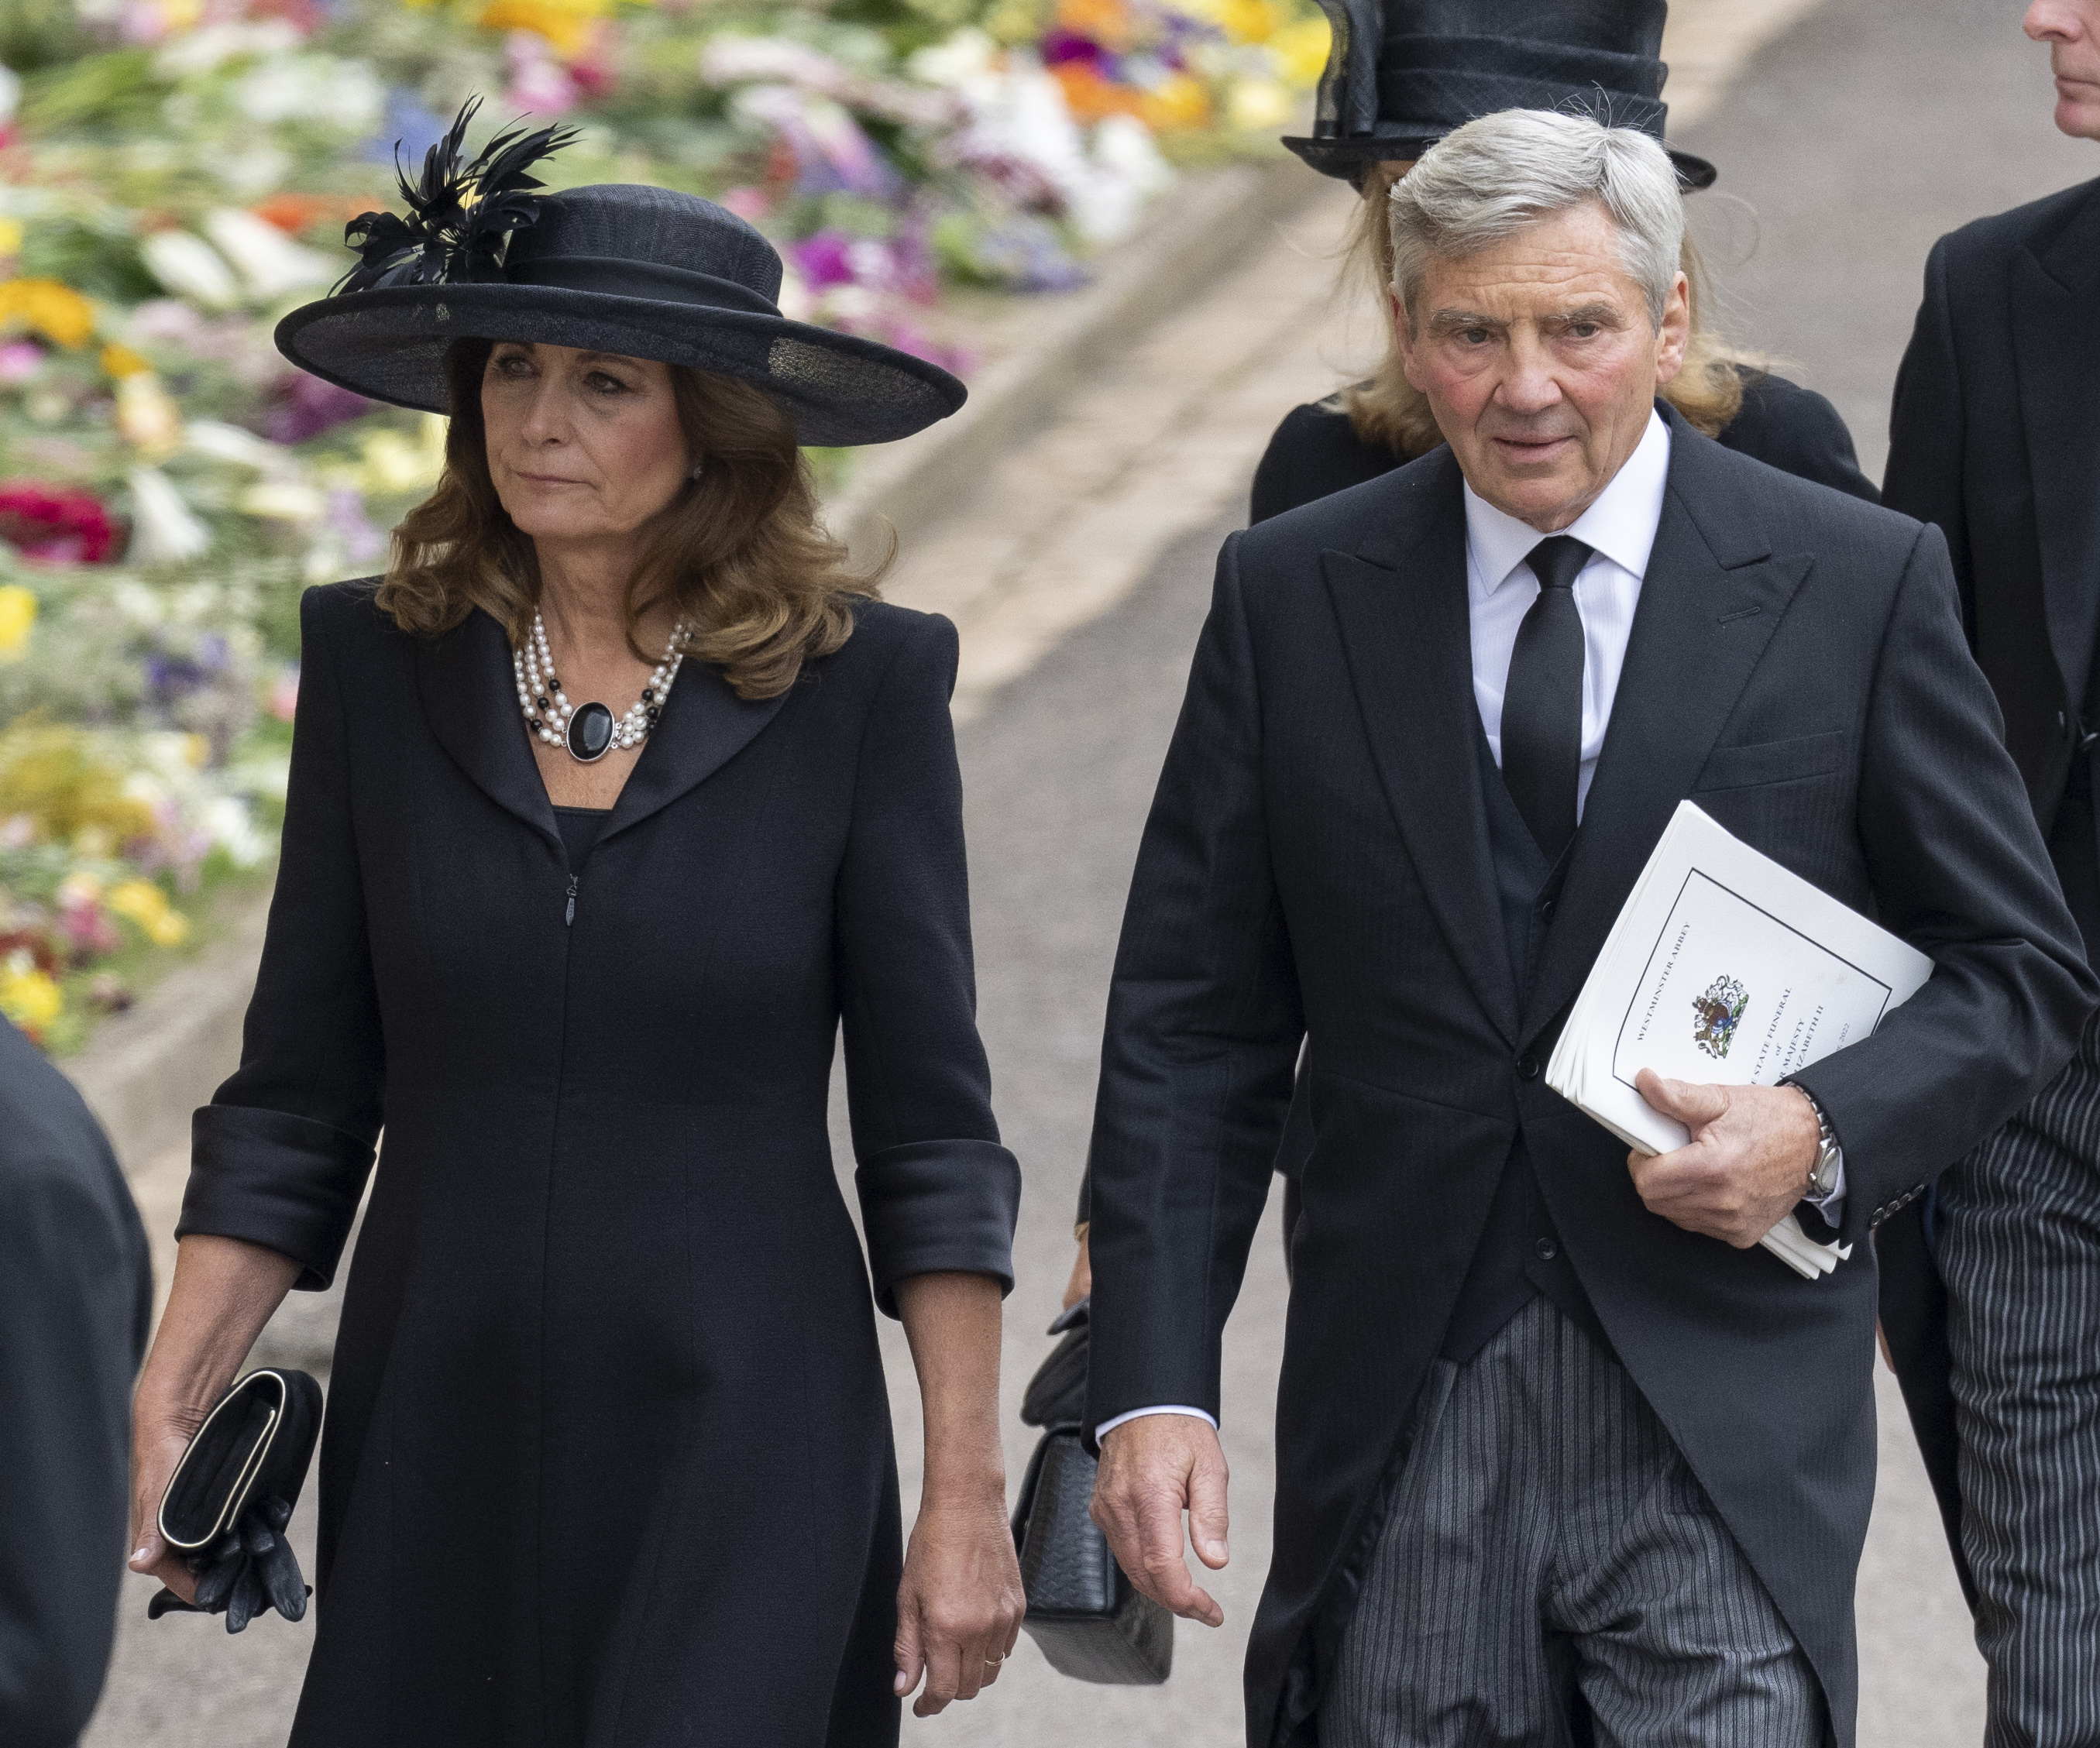 Carole and Michael Middleton arriving at the Committal Service for Queen Elizabeth II in Windsor, England on September 19, 2022 | Source: Getty Images